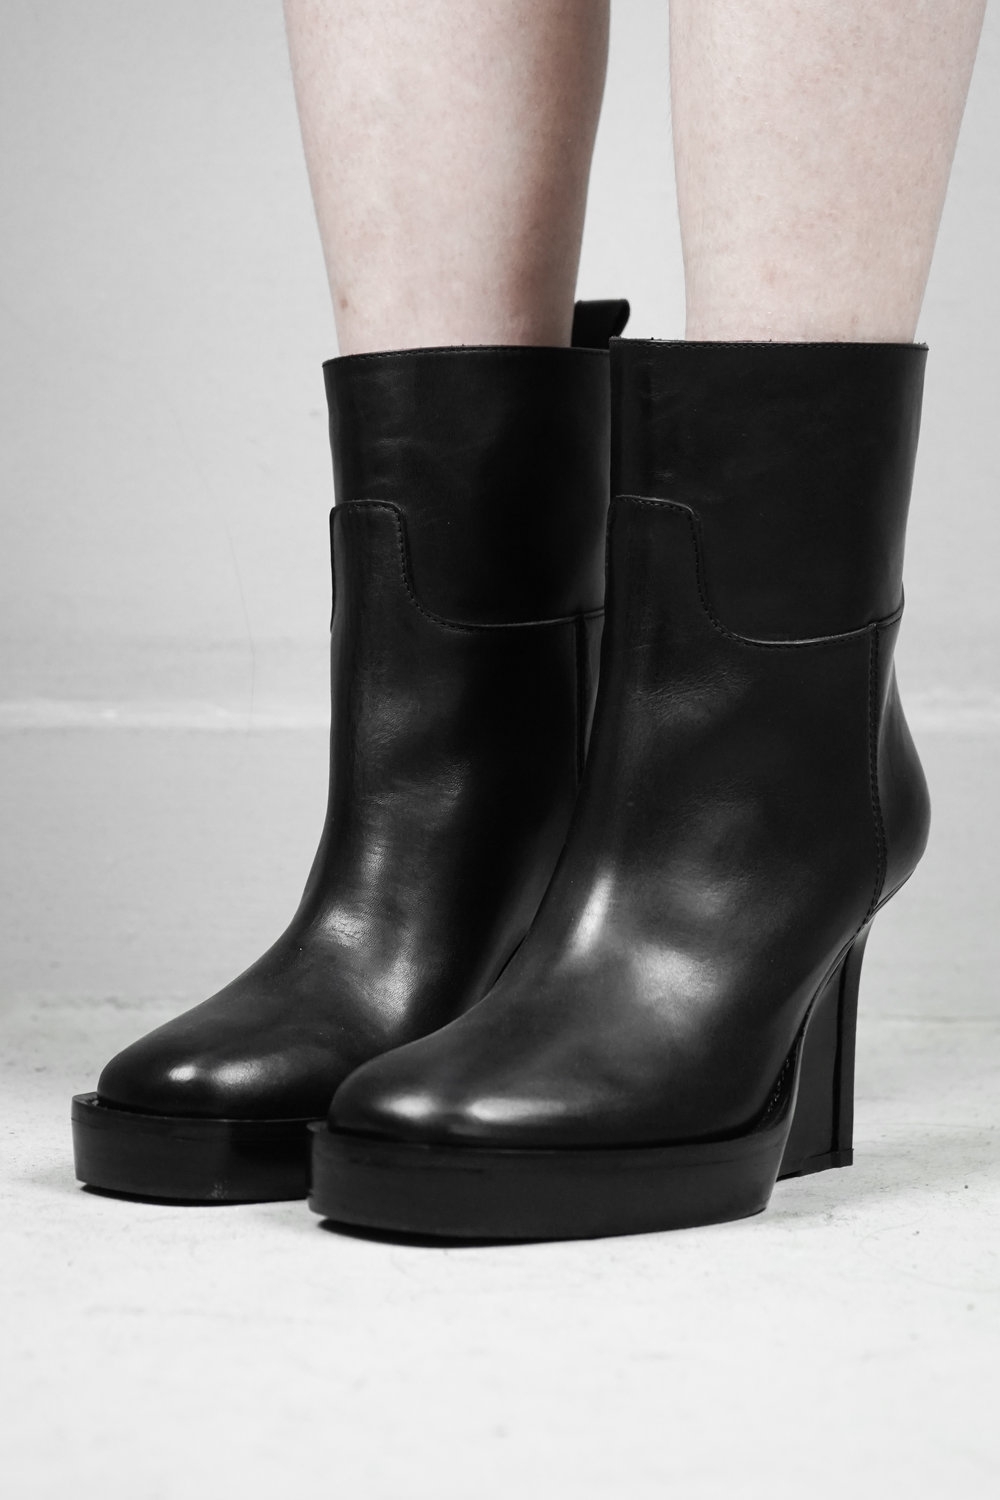 Ann Demeulemeester – Womens – Ankle Boots – Black – Leather – Wedge Heel